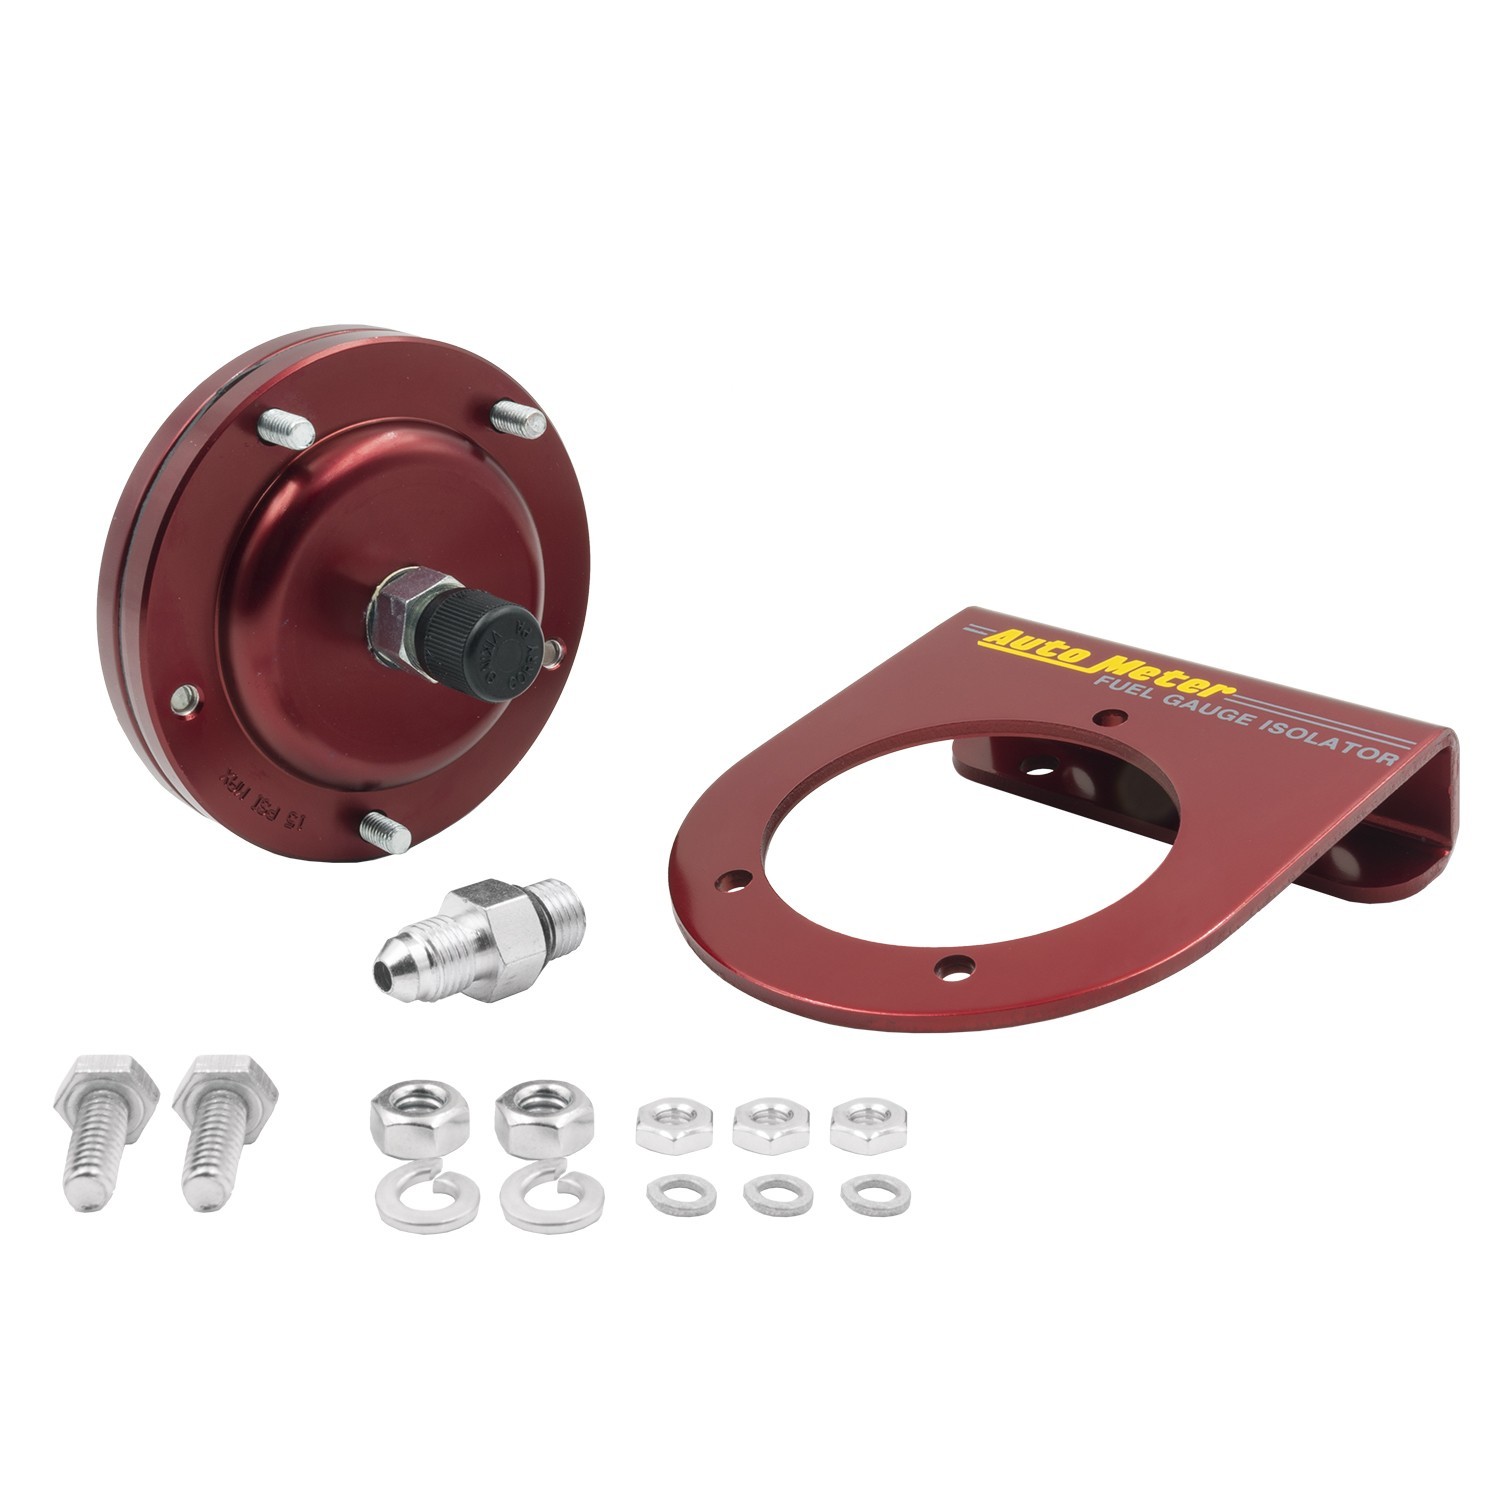 Auto Meter Fuel Pressure Isolator, 4 AN Fittings, Aluminum, Red Anodize, Mechanical Pressure Gauges, Kit